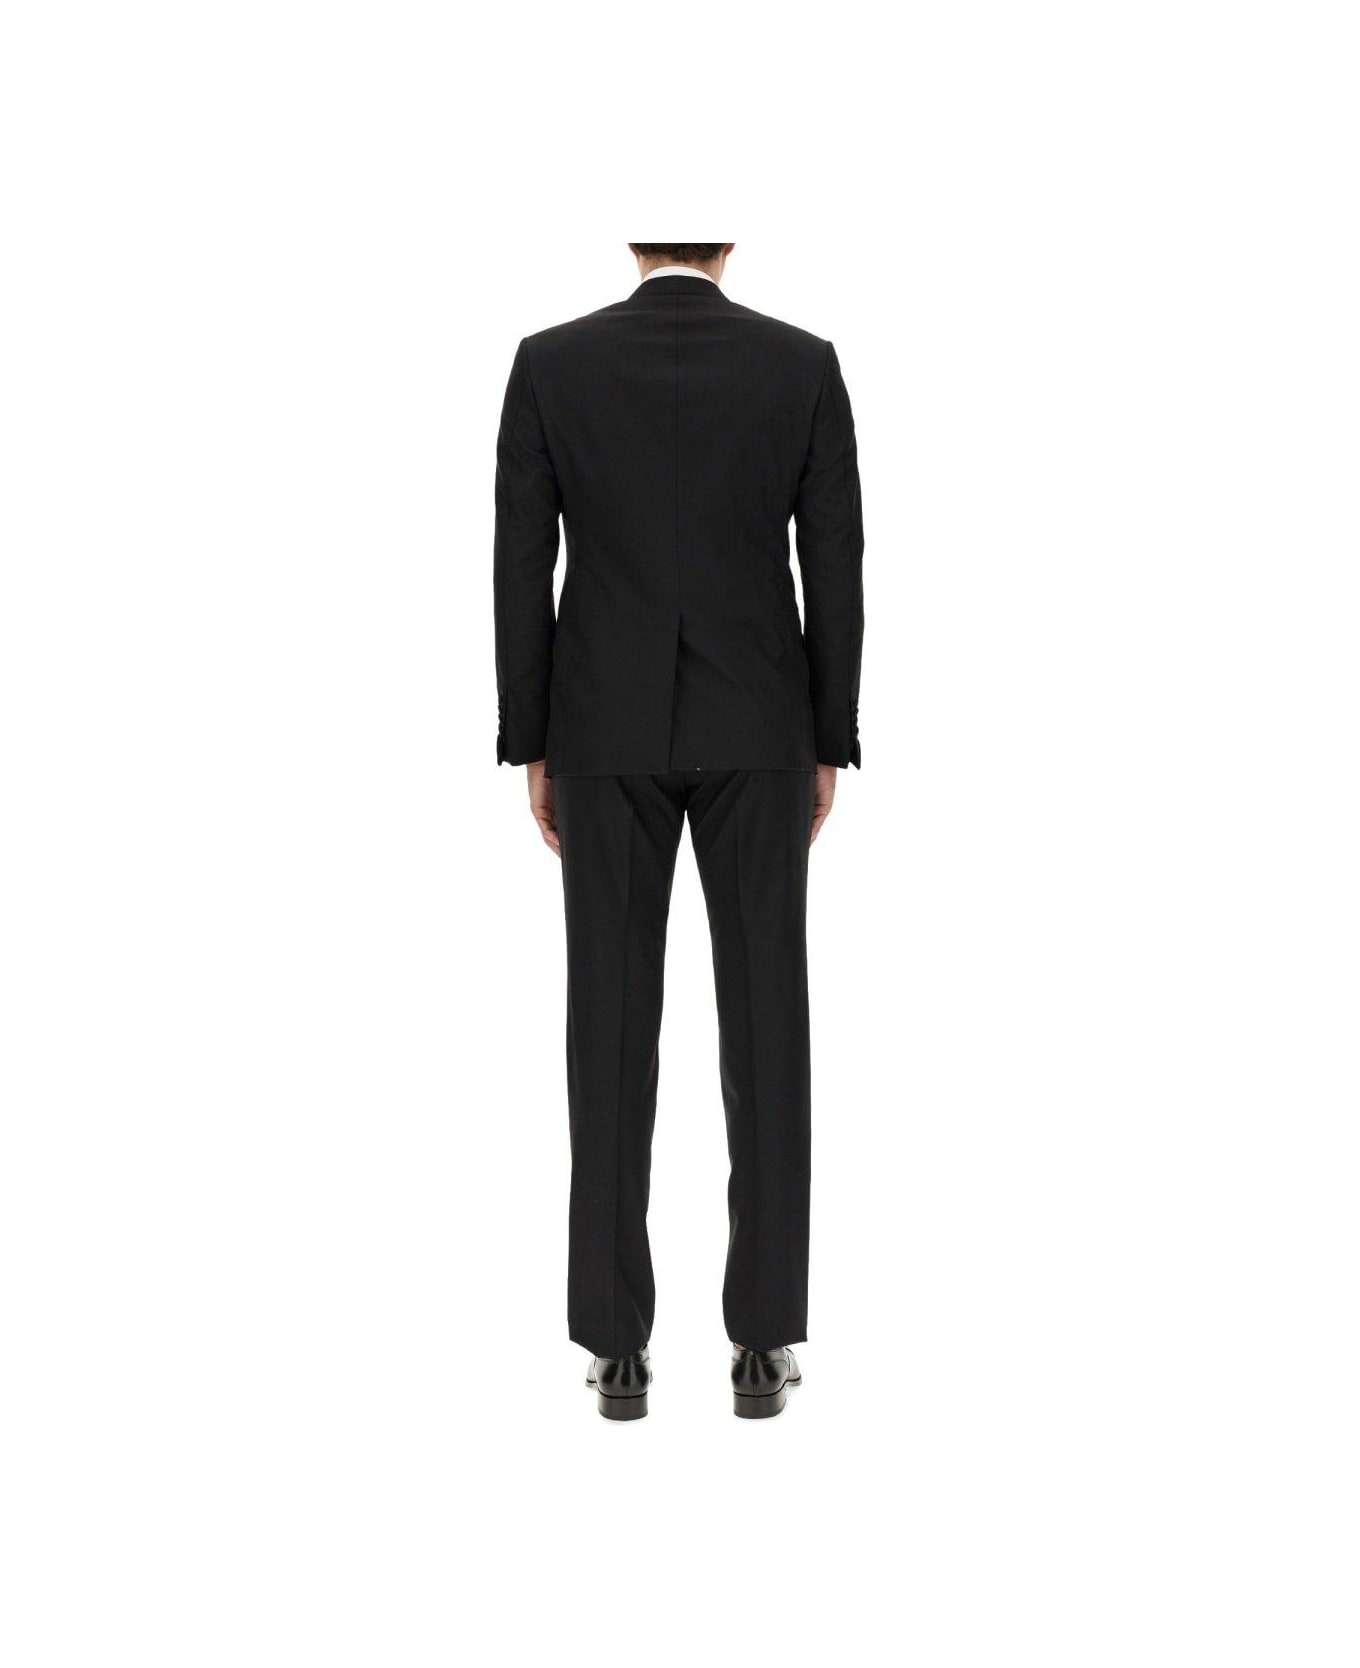 Tom Ford Single-breasted Two-piece Tailored Suit